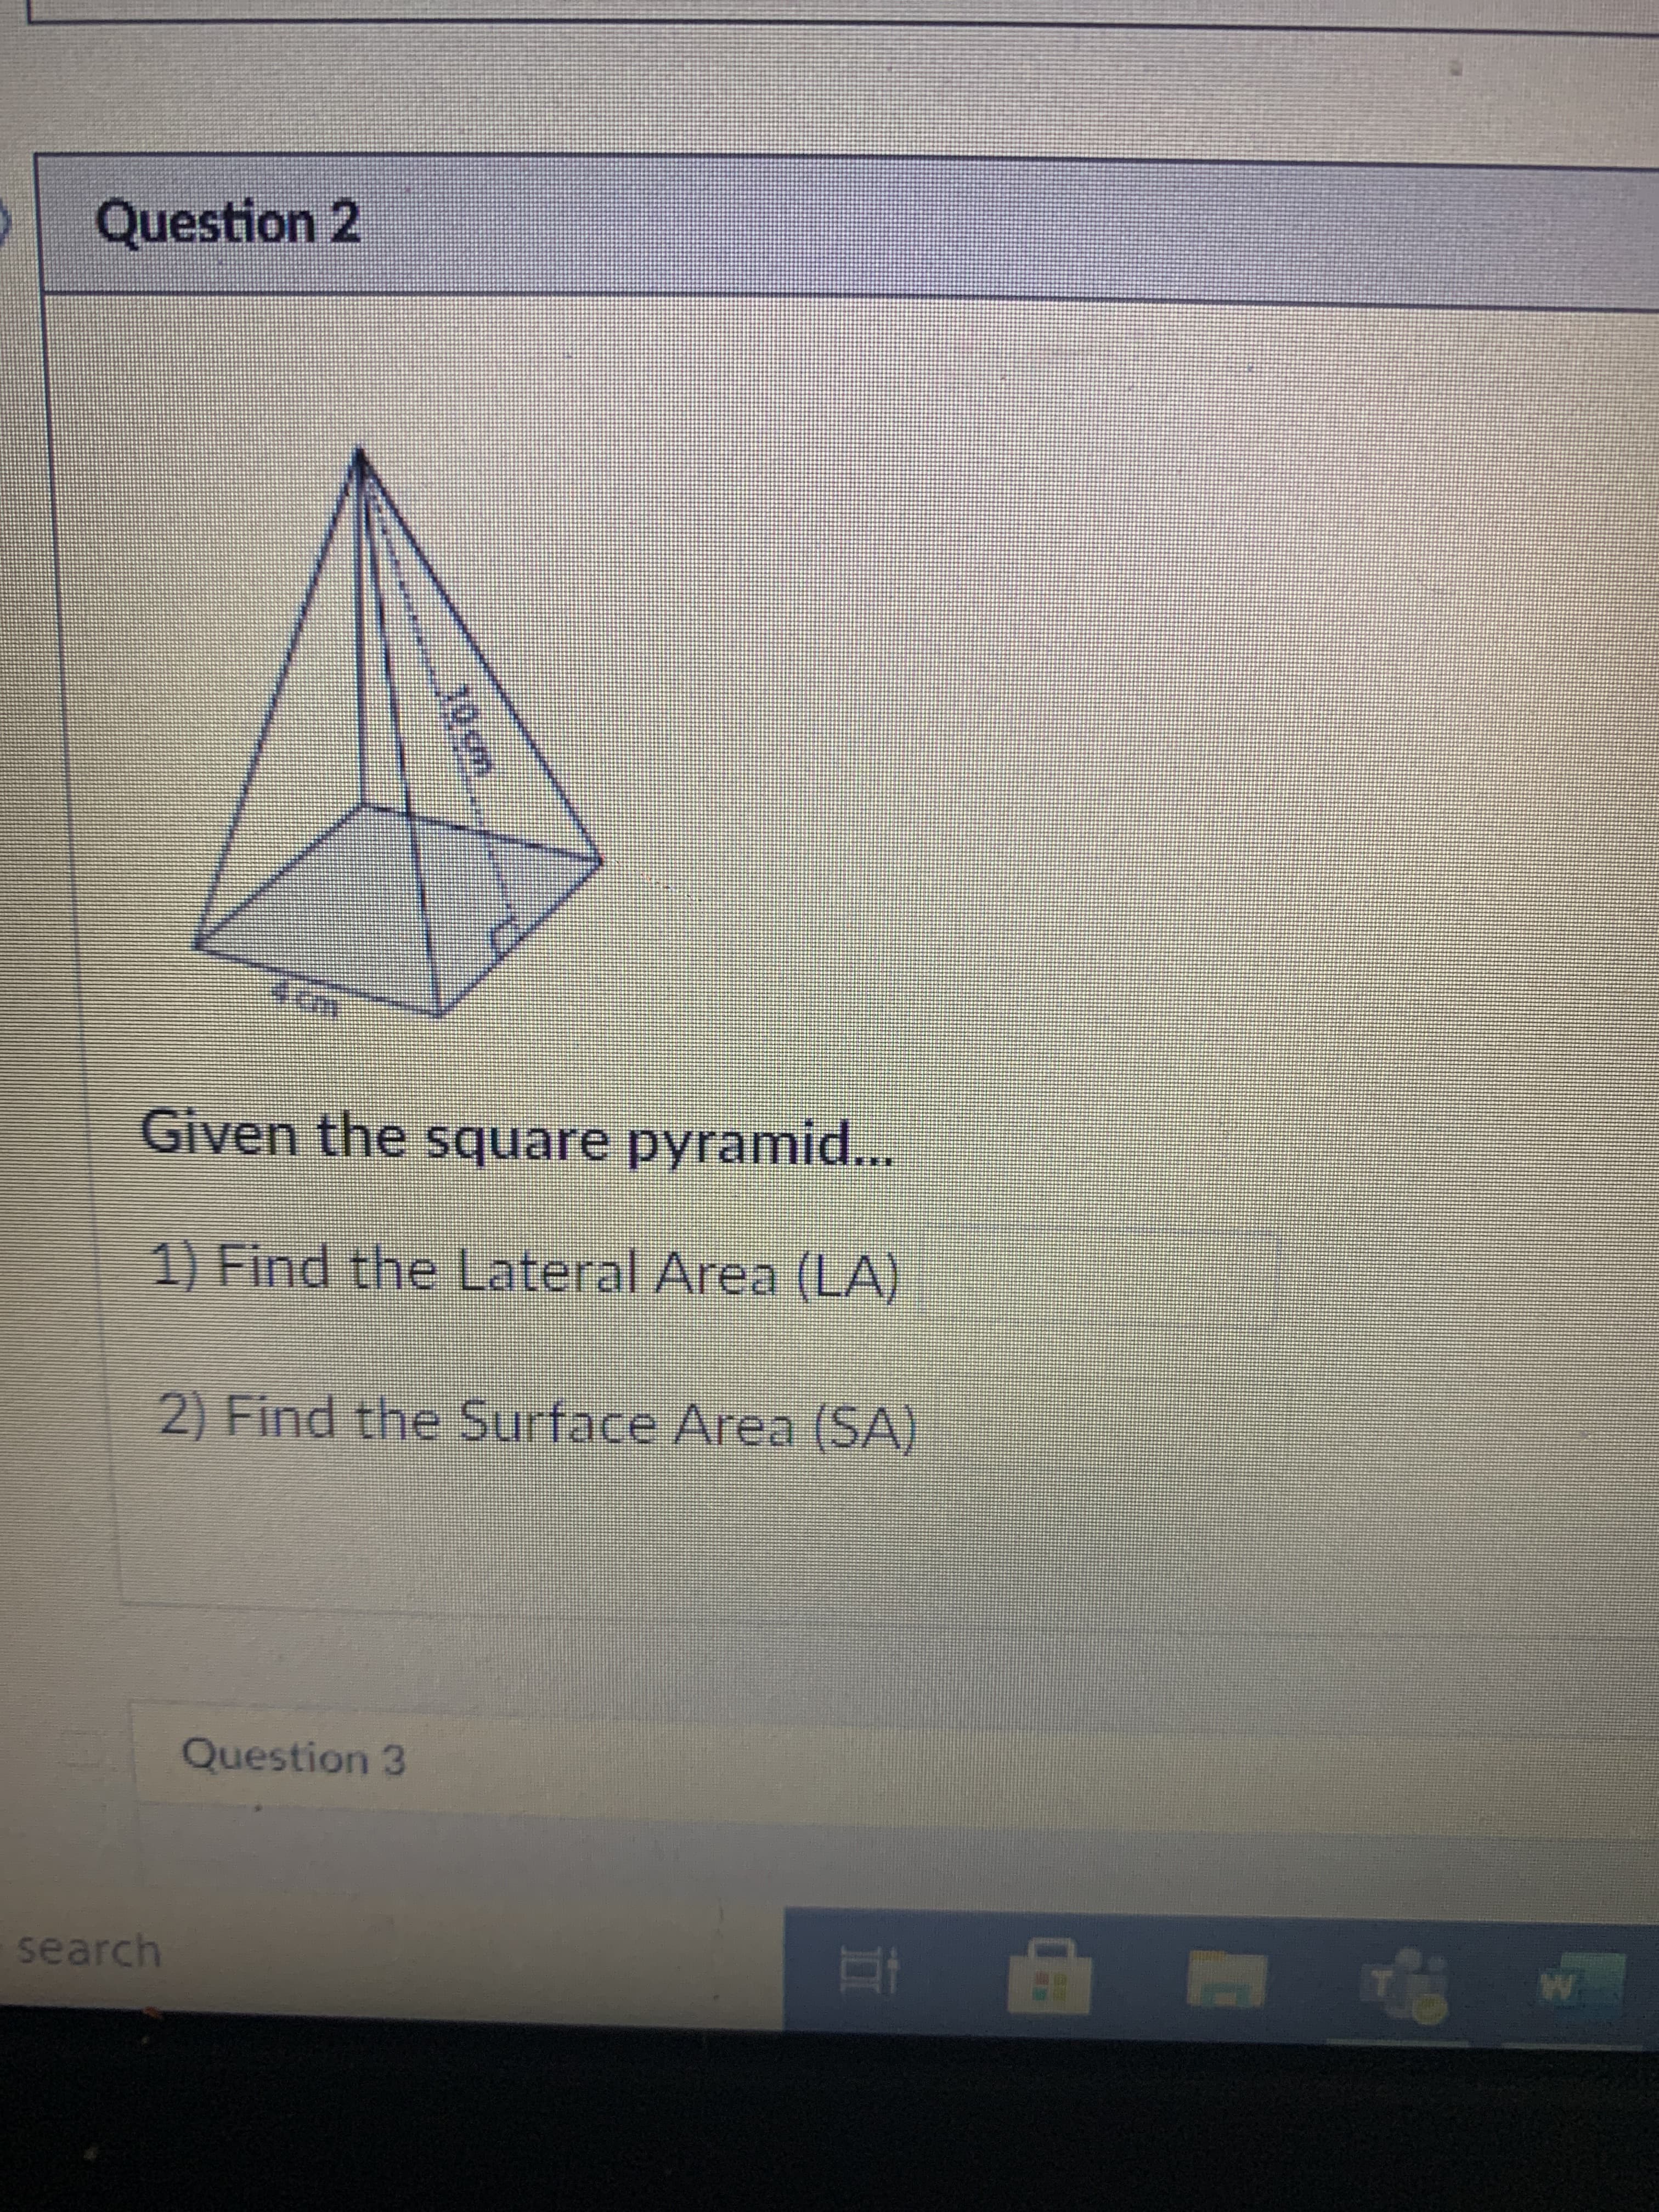 Given the square pyramnid...
1) Find the Lateral Area (LA)
2) Find the Surface Area (SA)
